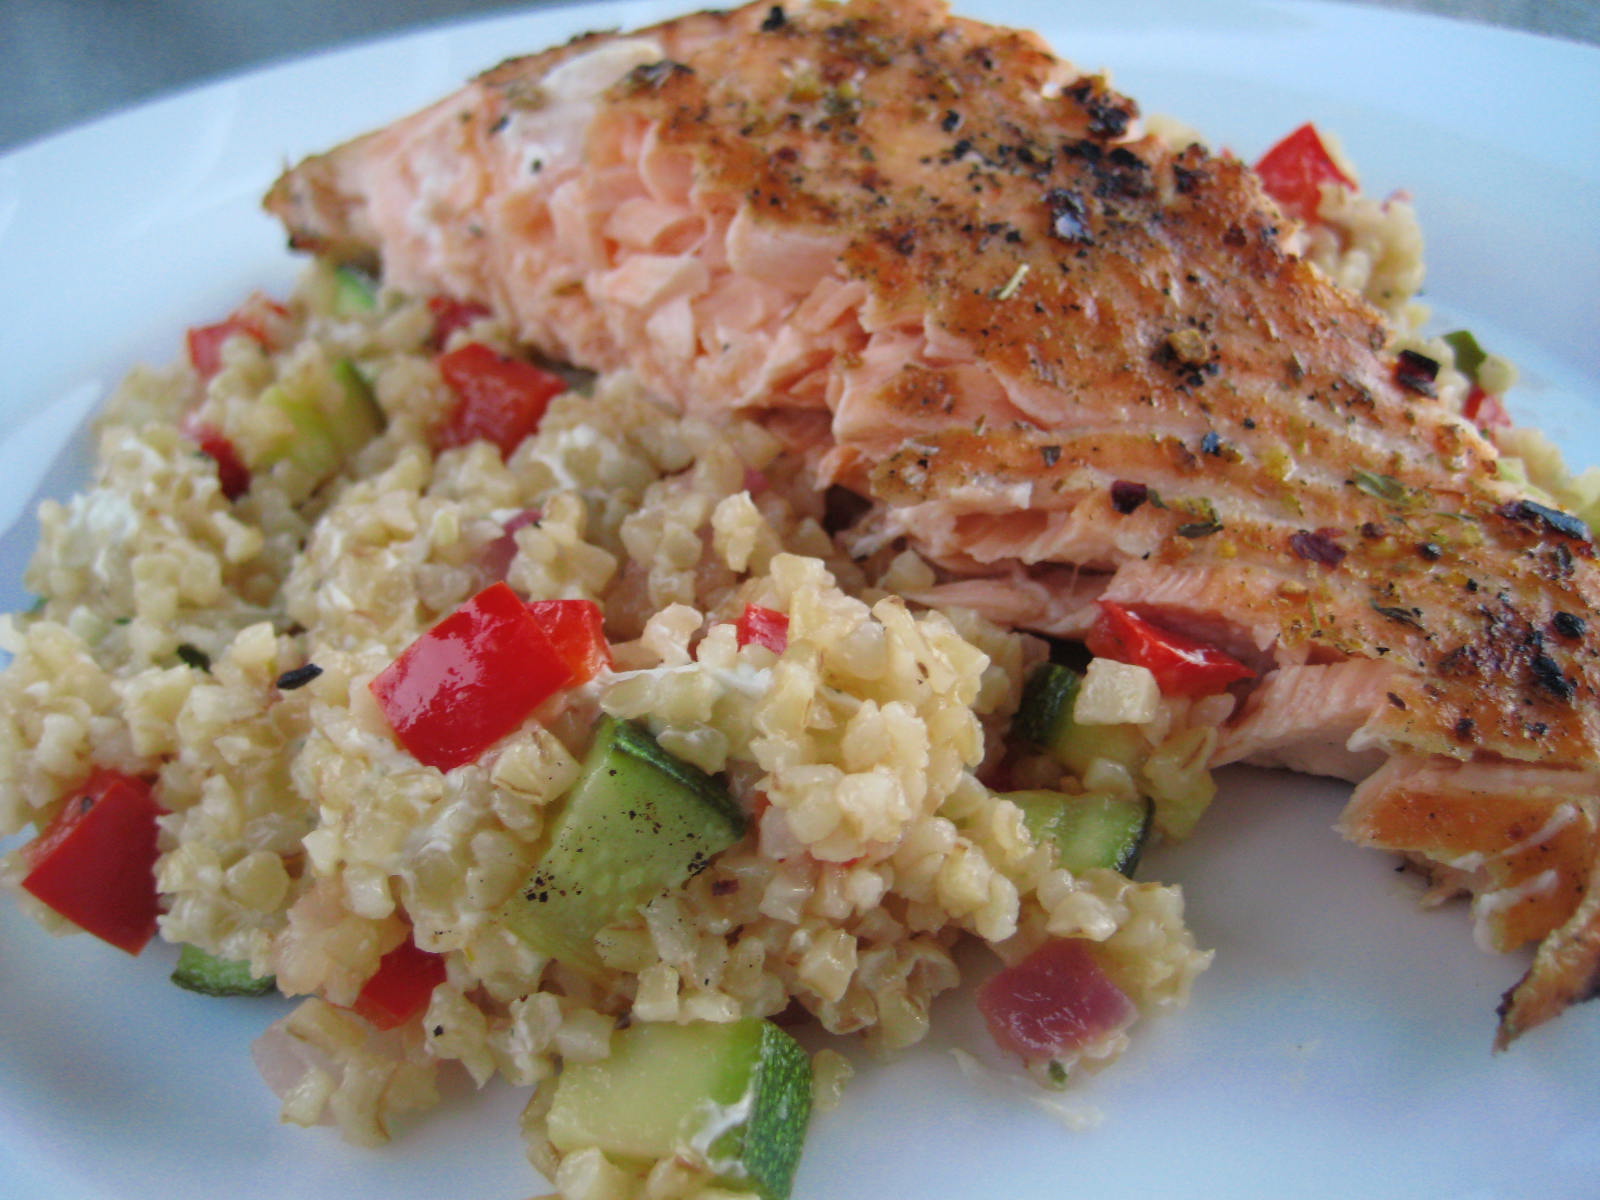 Dinner with the Welches: Grilled Salmon with Bulgur and Veggie Salad